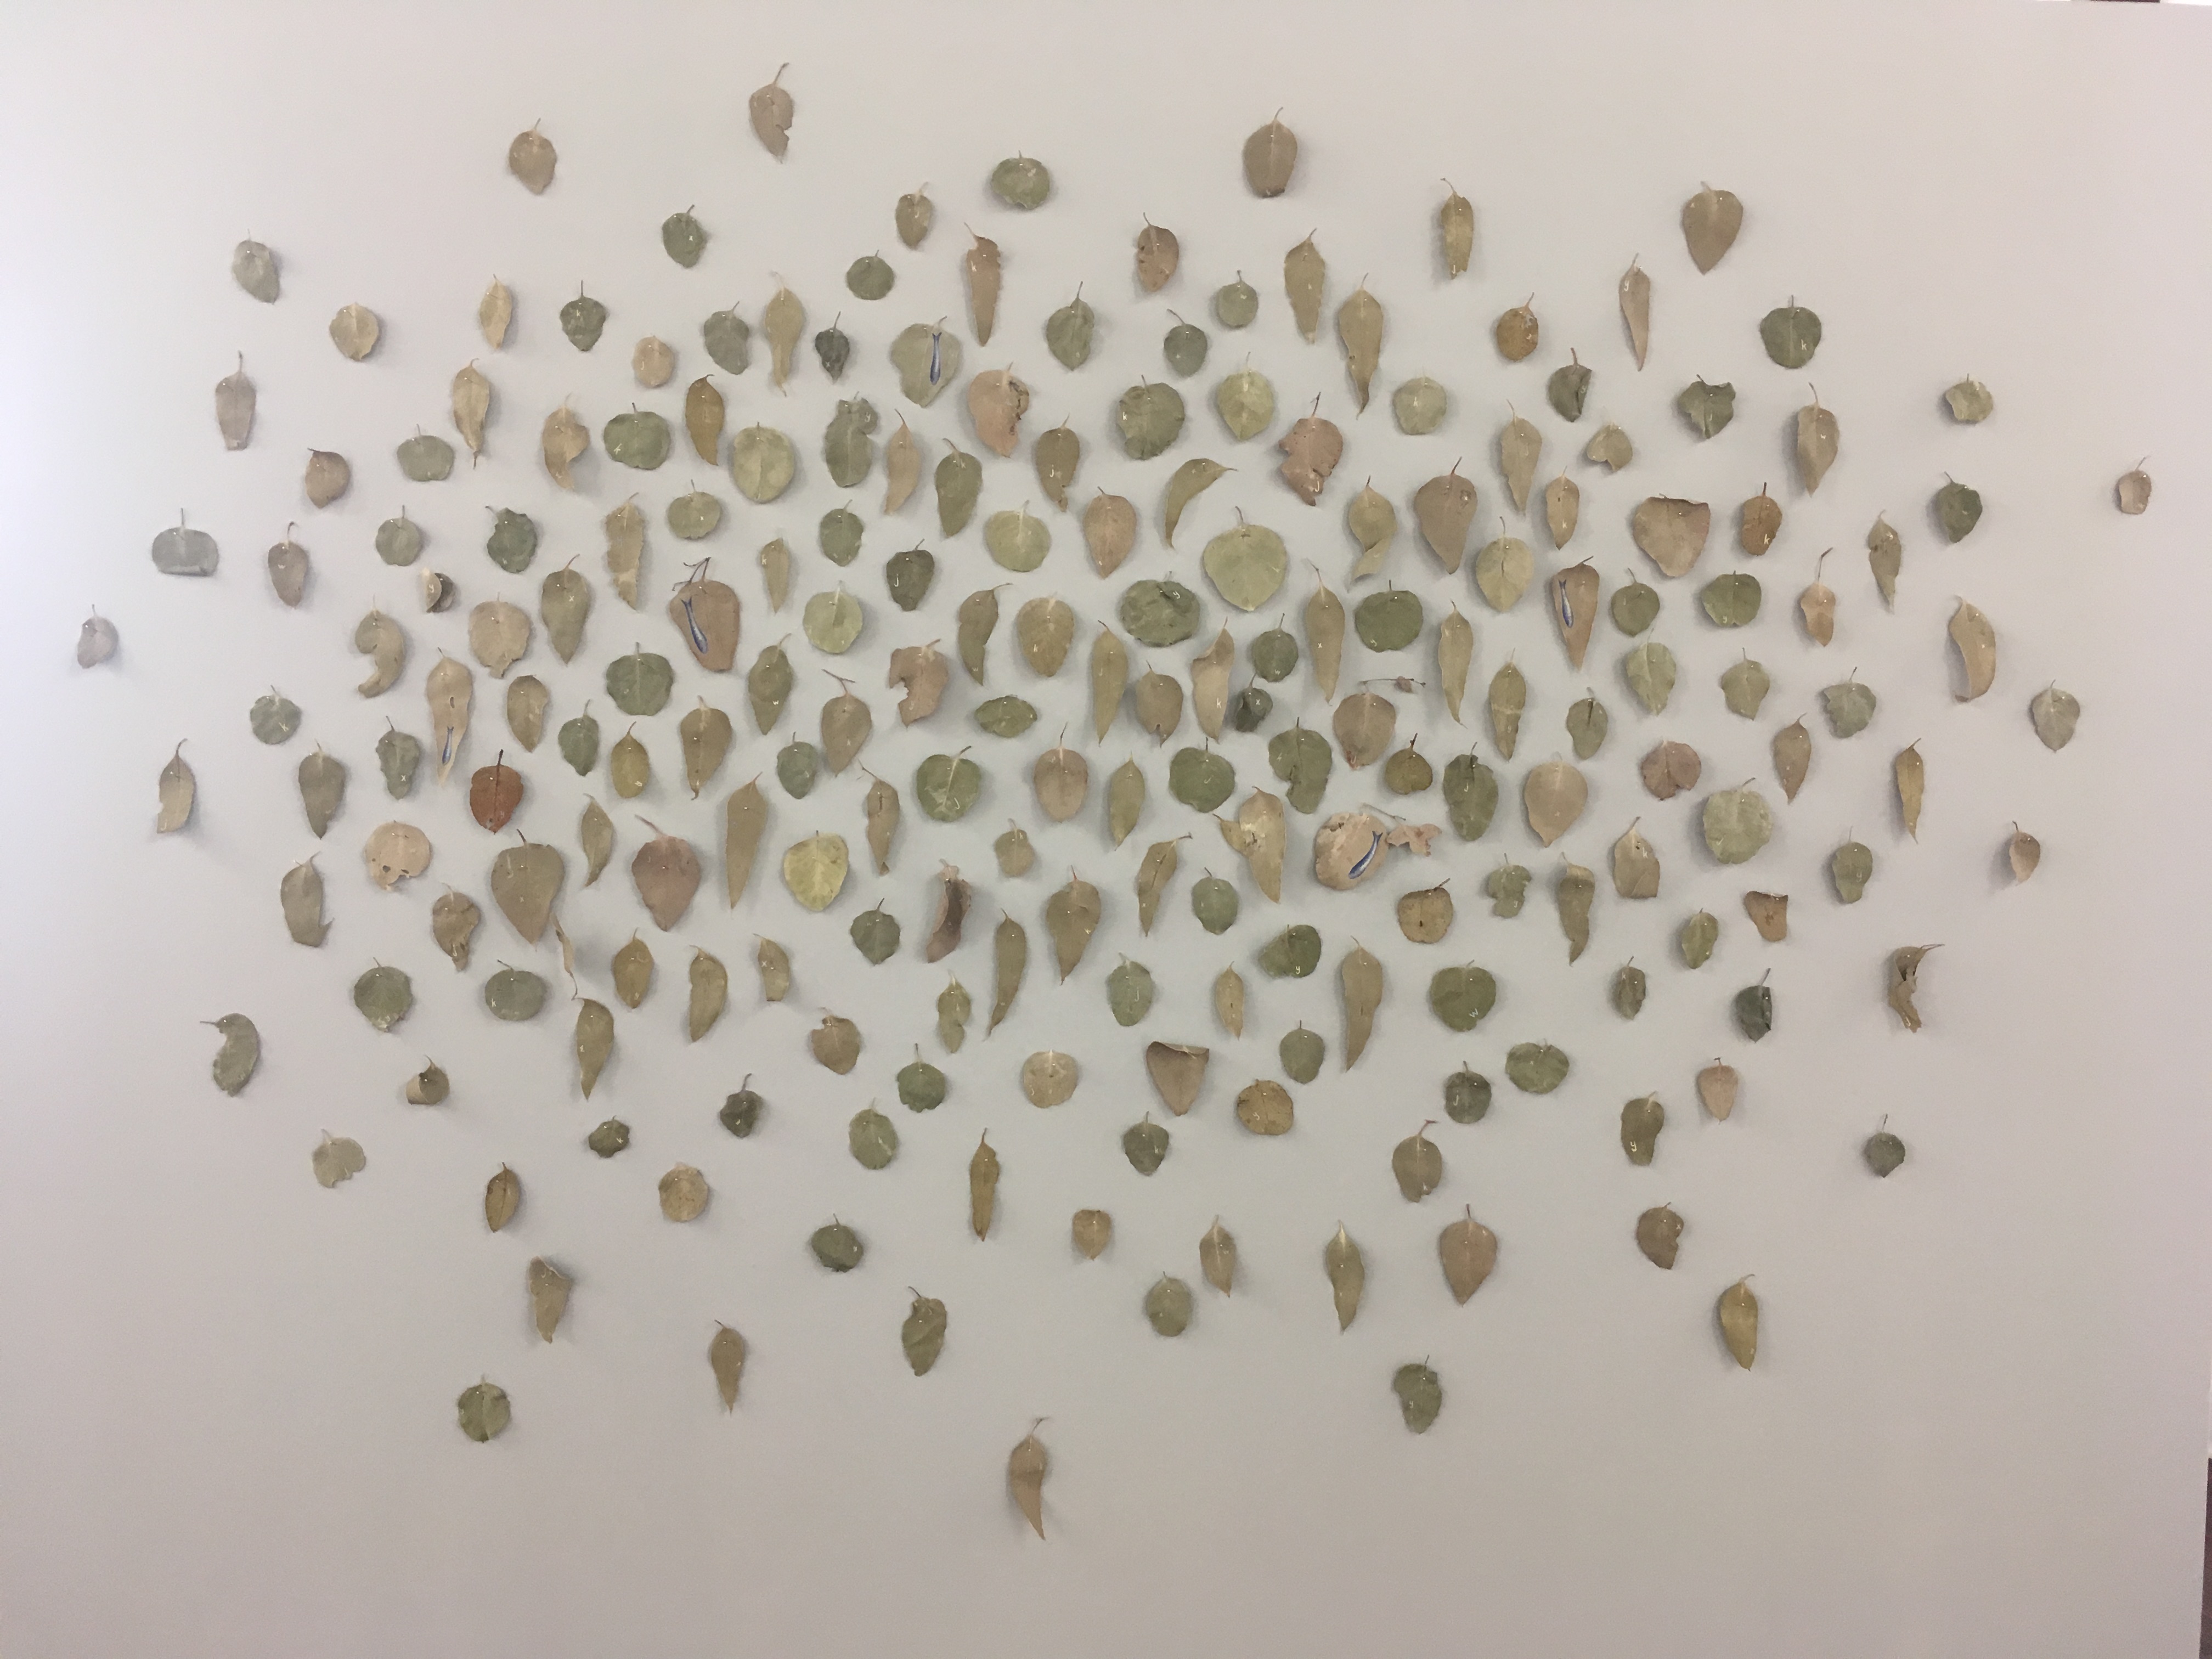 Fish out of Water, Mildura – Melbourne, gum leaves collected half way along the highway between Mildura and Melbourne and gouache, approximately 200h x 300w cm, 2018